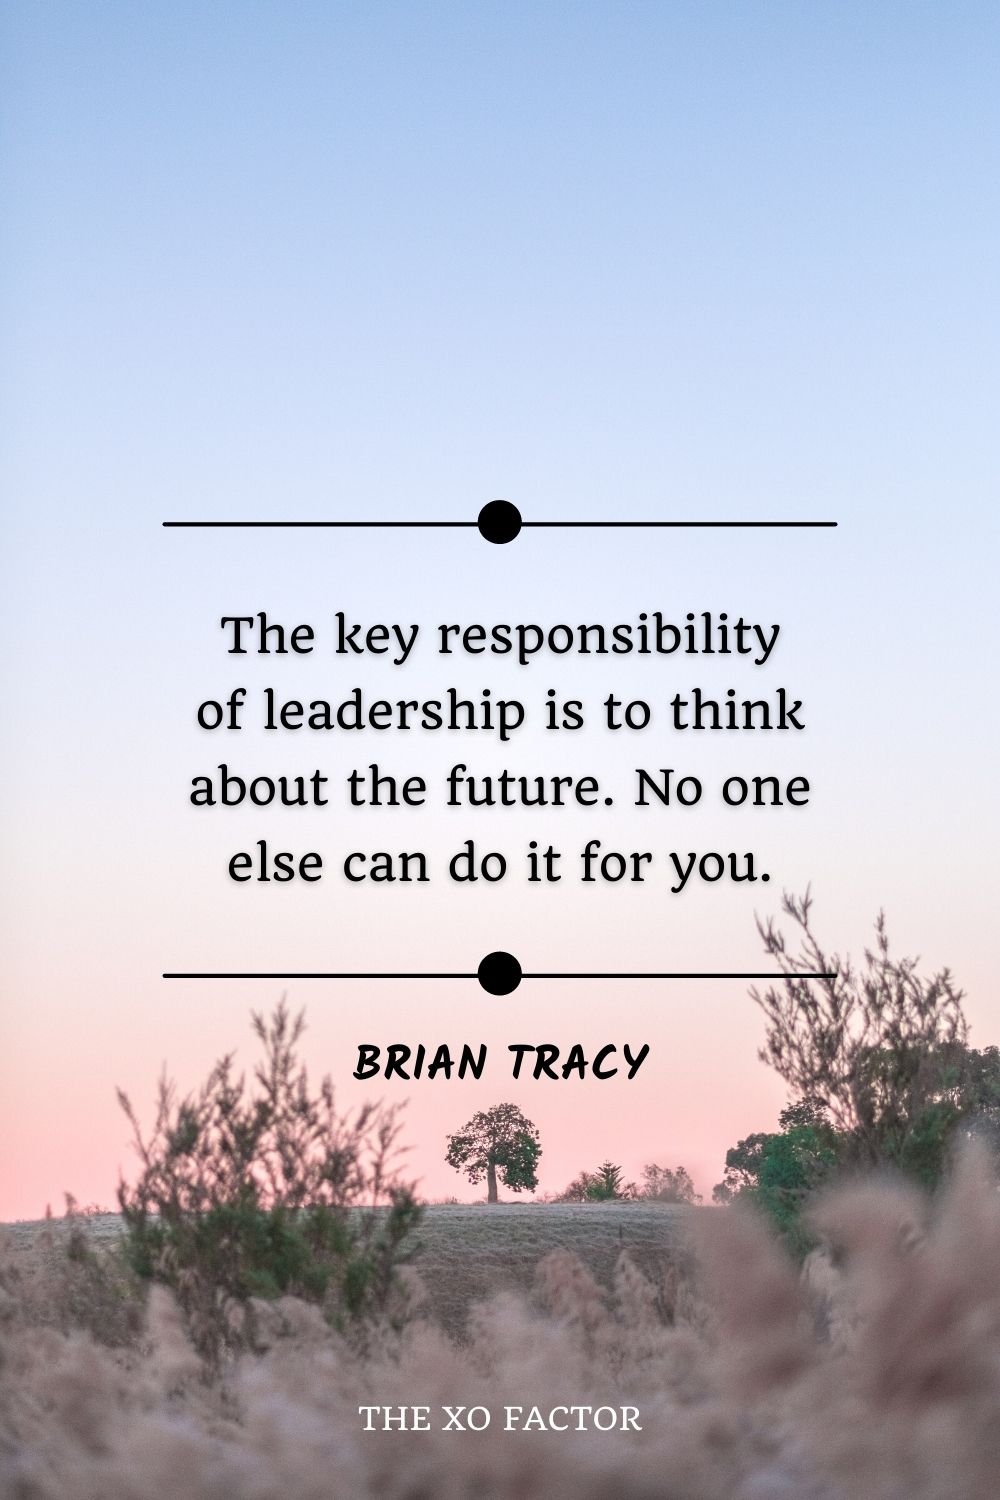 The key responsibility of leadership is to think about the future. No one else can do it for you.” – Brian Tracy